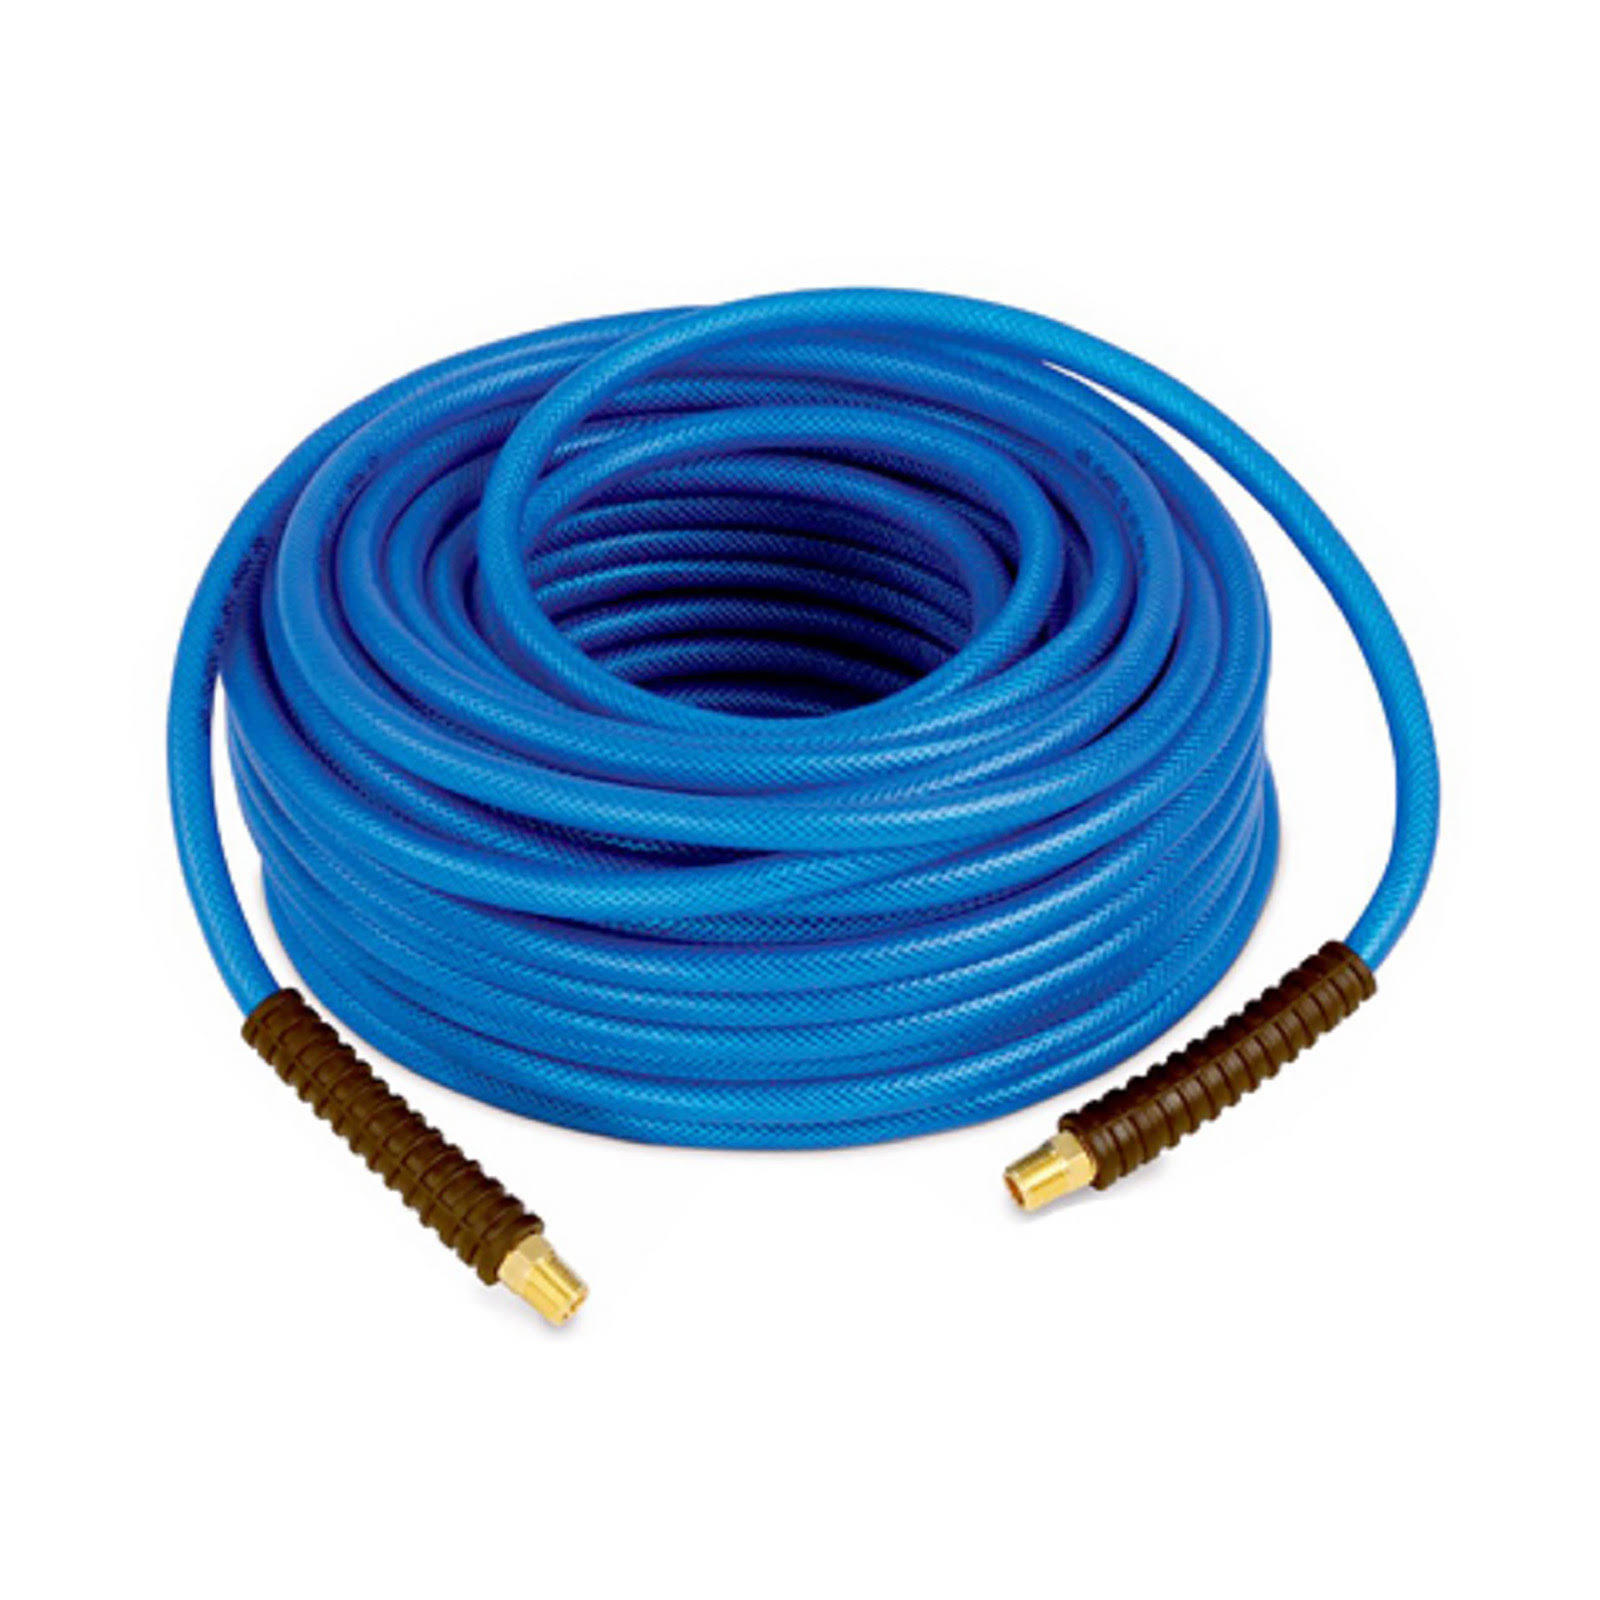 INTRADIN HK CO. LIMITED Poly Air Hose 900 PSI Bursting Pressure 1/4-In. x 100-Ft. 1315S183